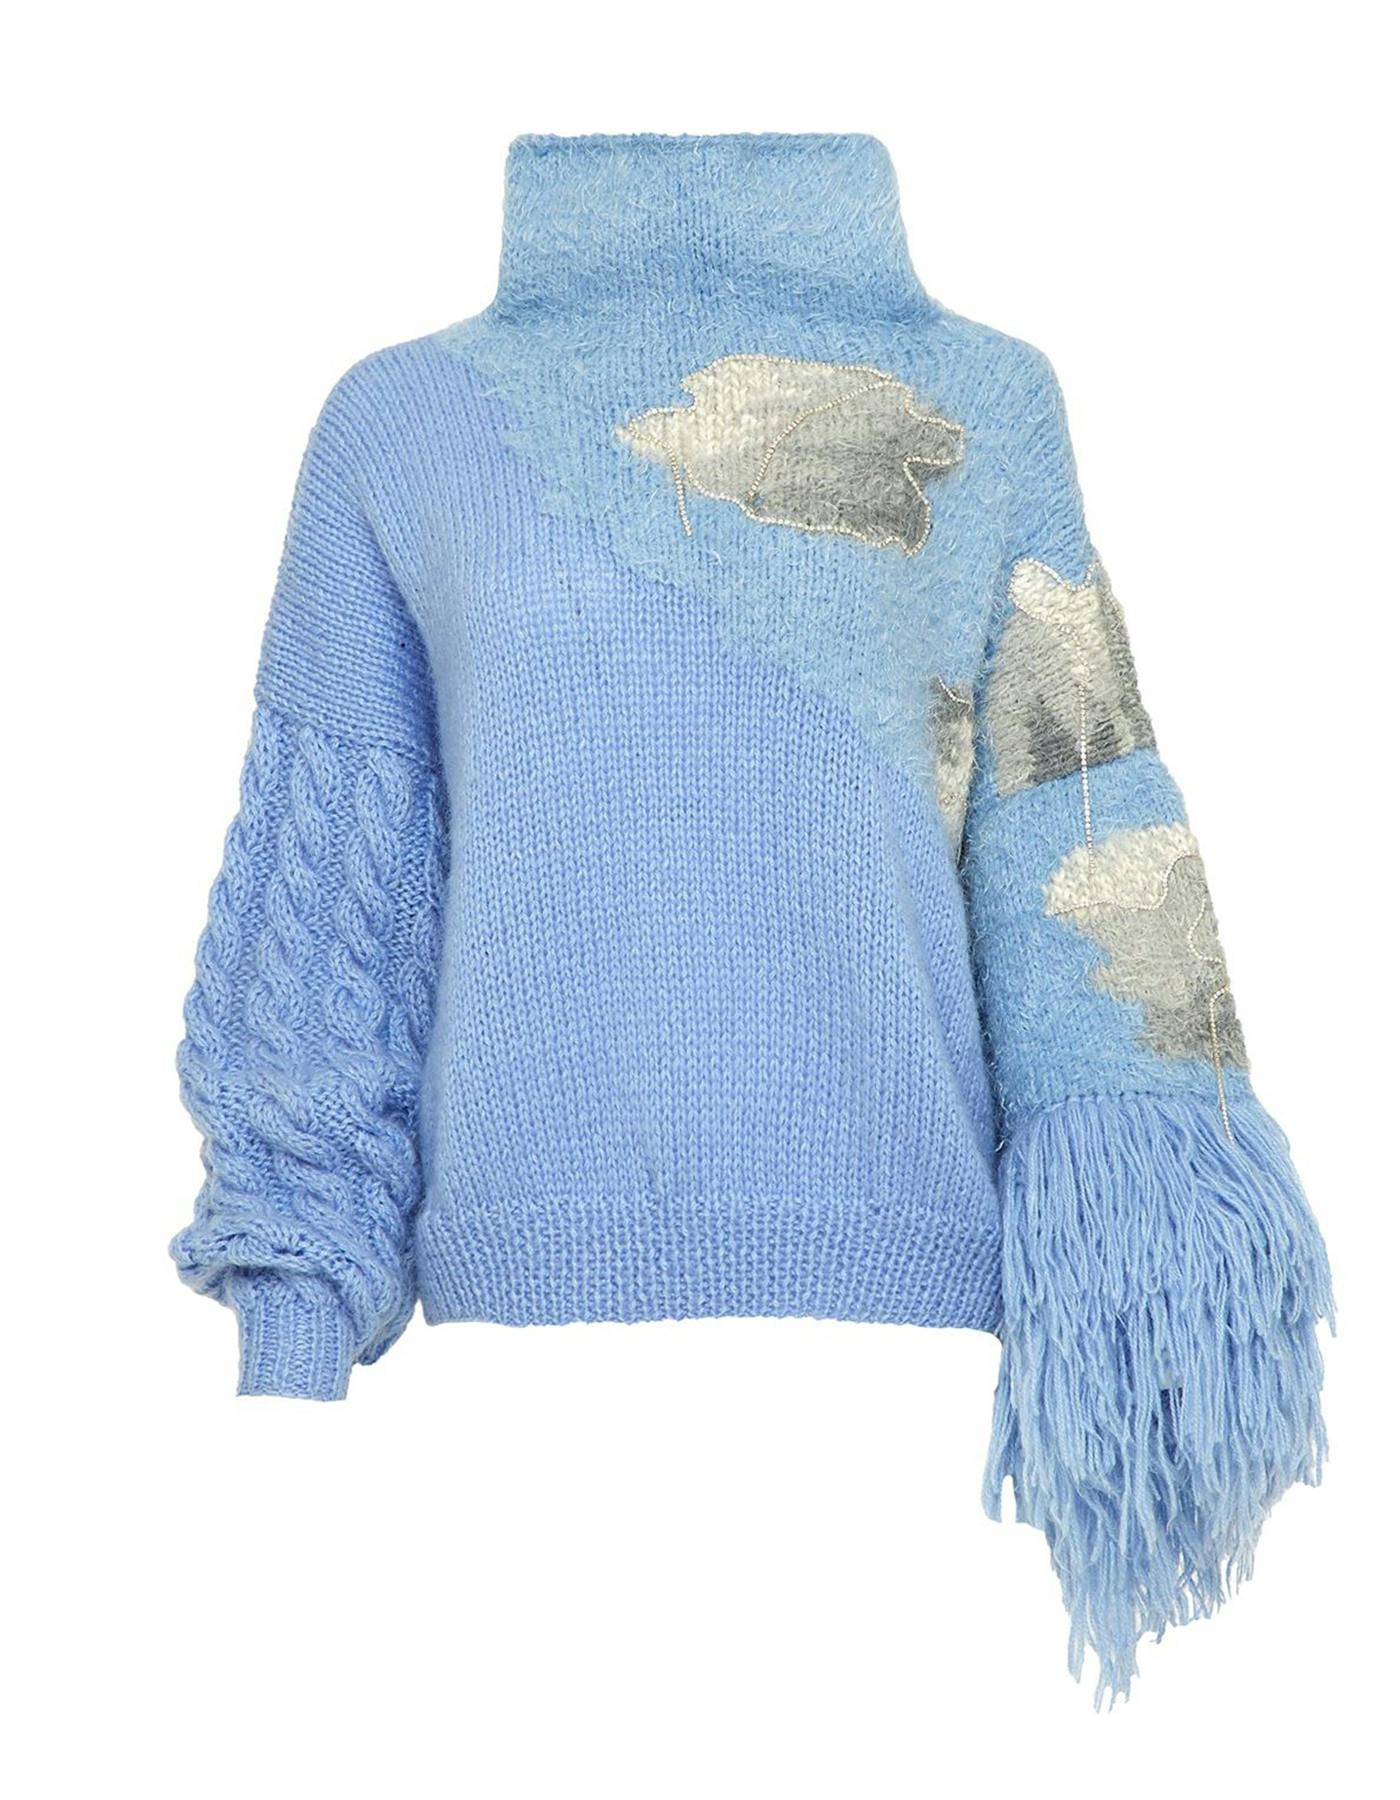 Knitted Blue Sweater, a product by BLIKVANGER